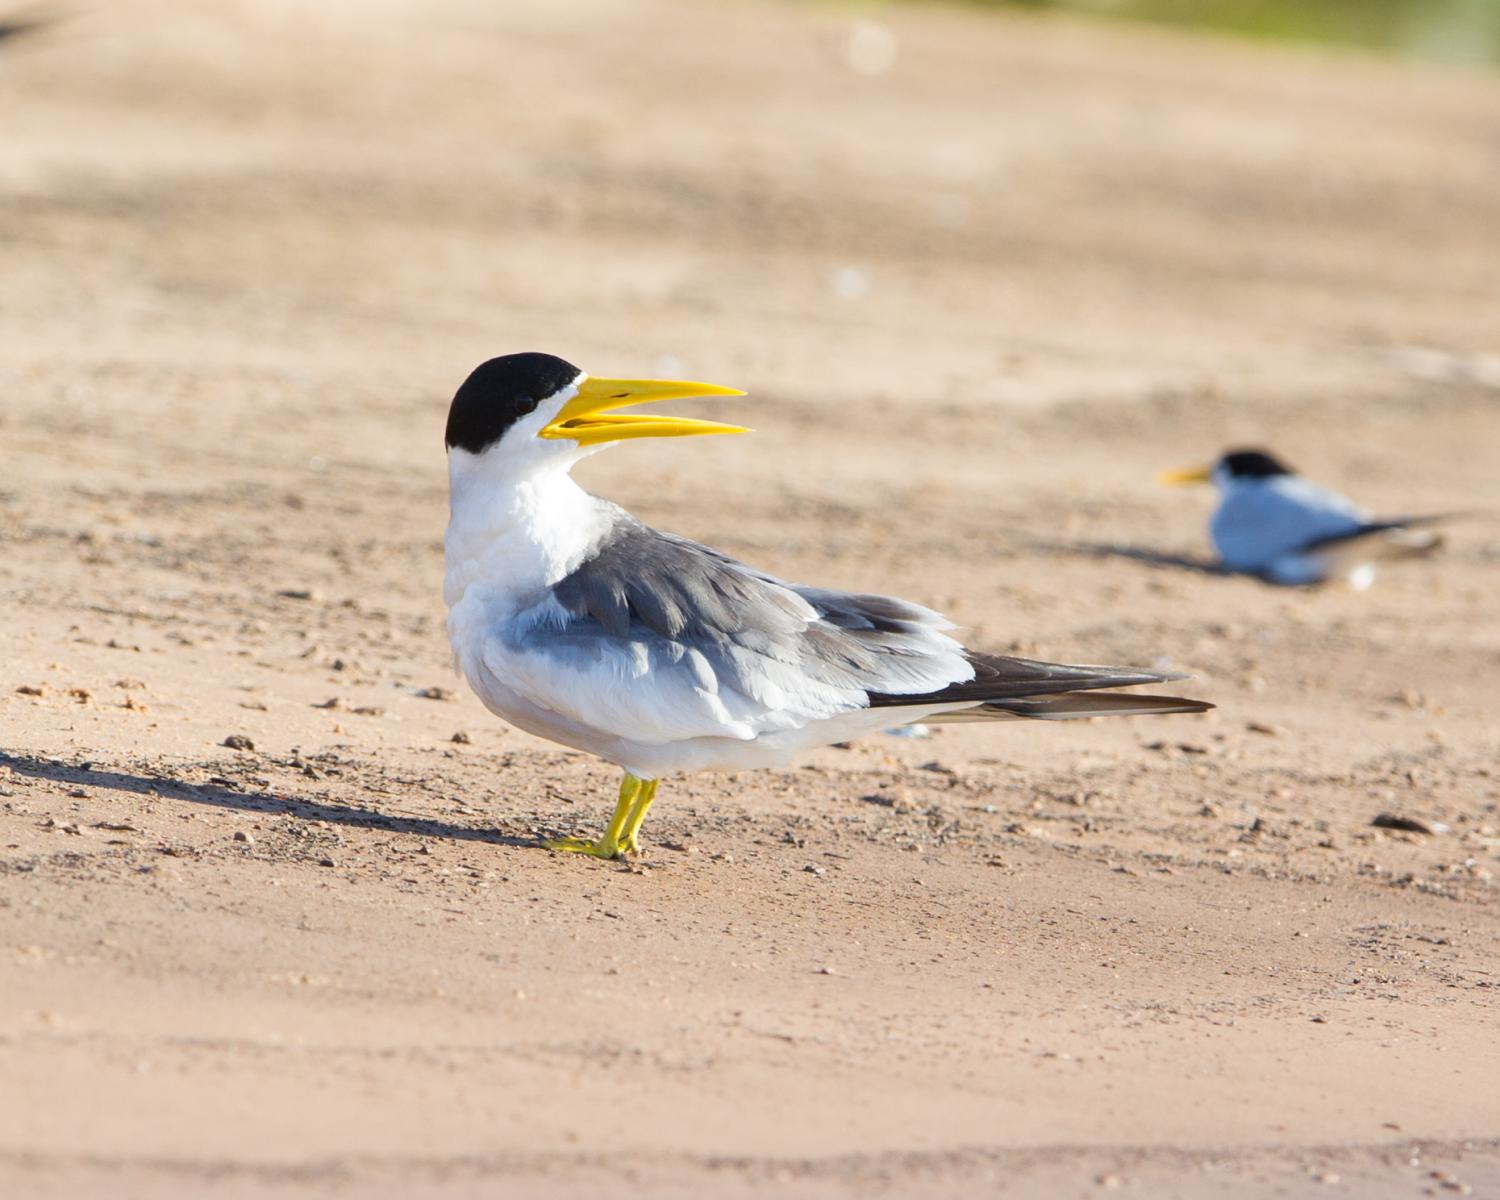 Large-billed and Yellow-billed Terns